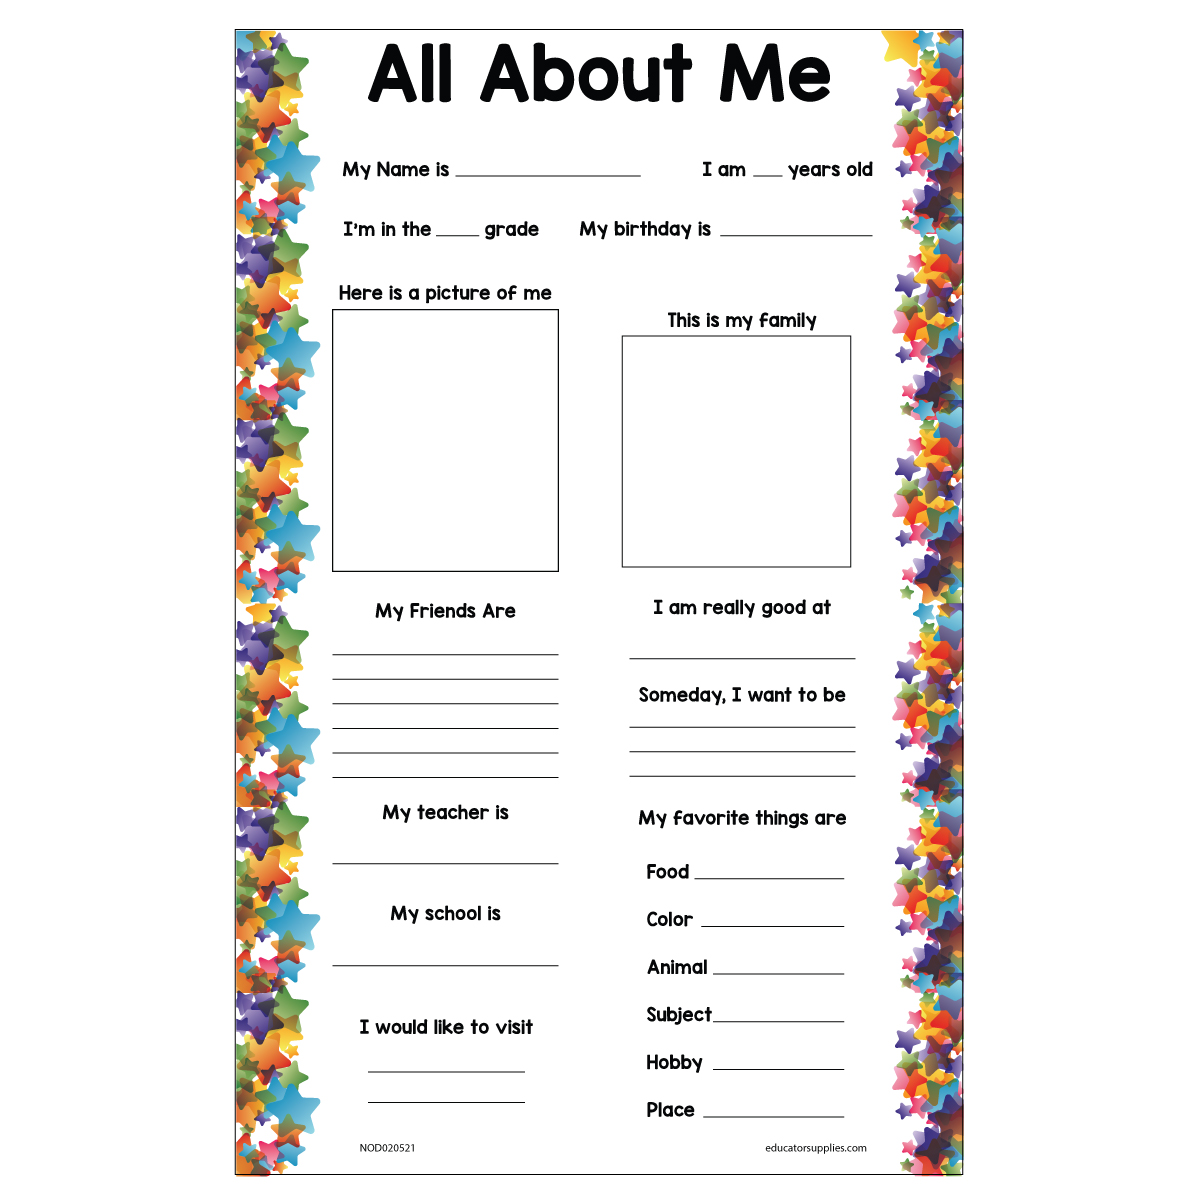 All About Me Posters 30 per Set